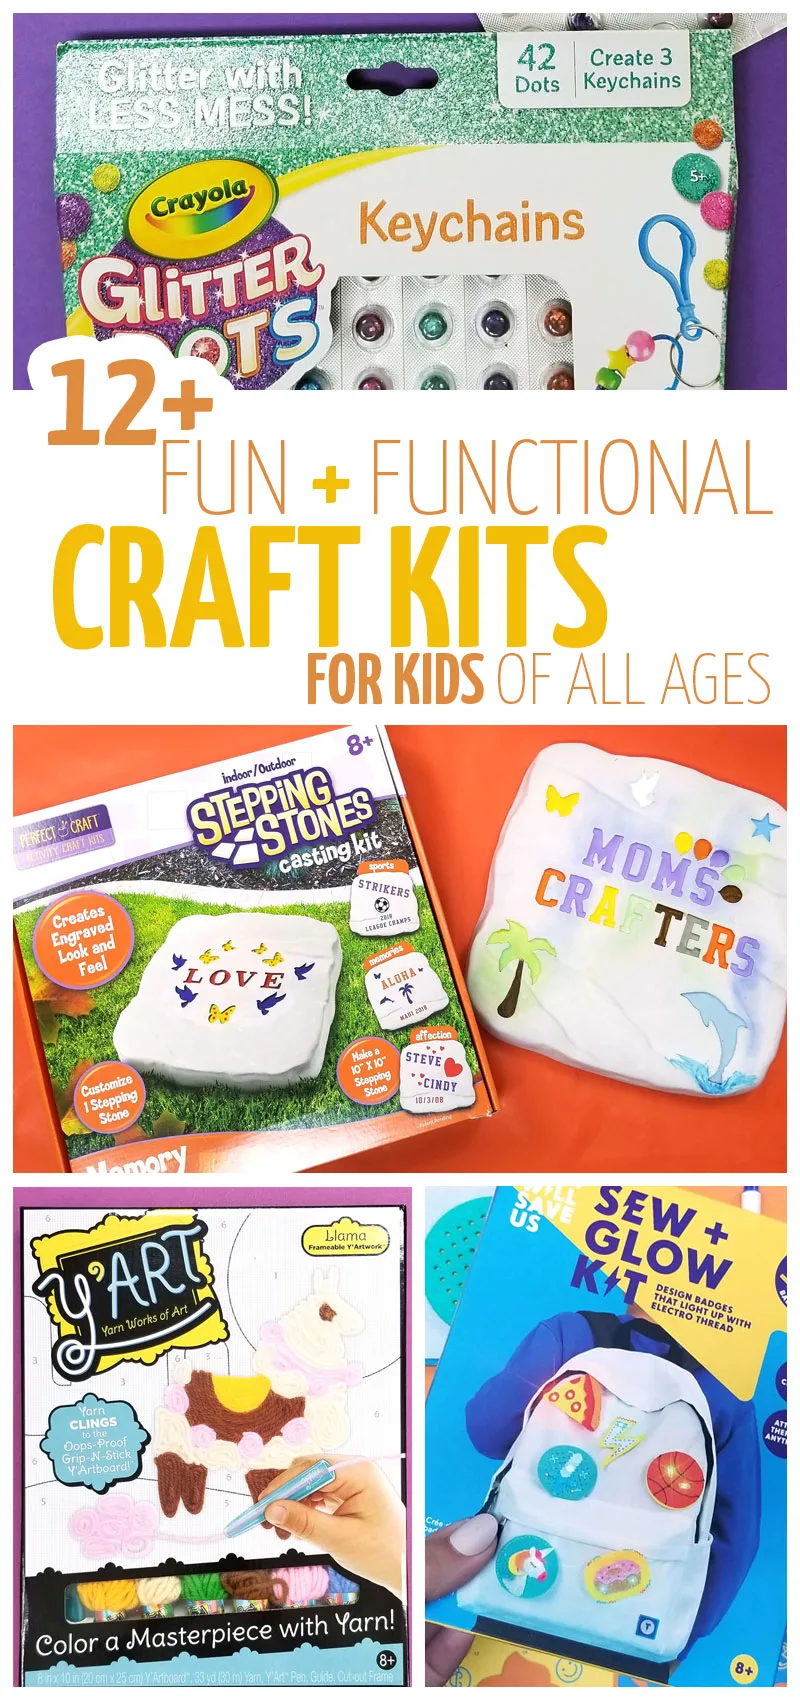 If you're looking for some fabulous gifts for crafters, try these craft making kits for kids! These wonderful holiday gifts for kids inspire creativity in preschoolers, kids, tweens, and teens!